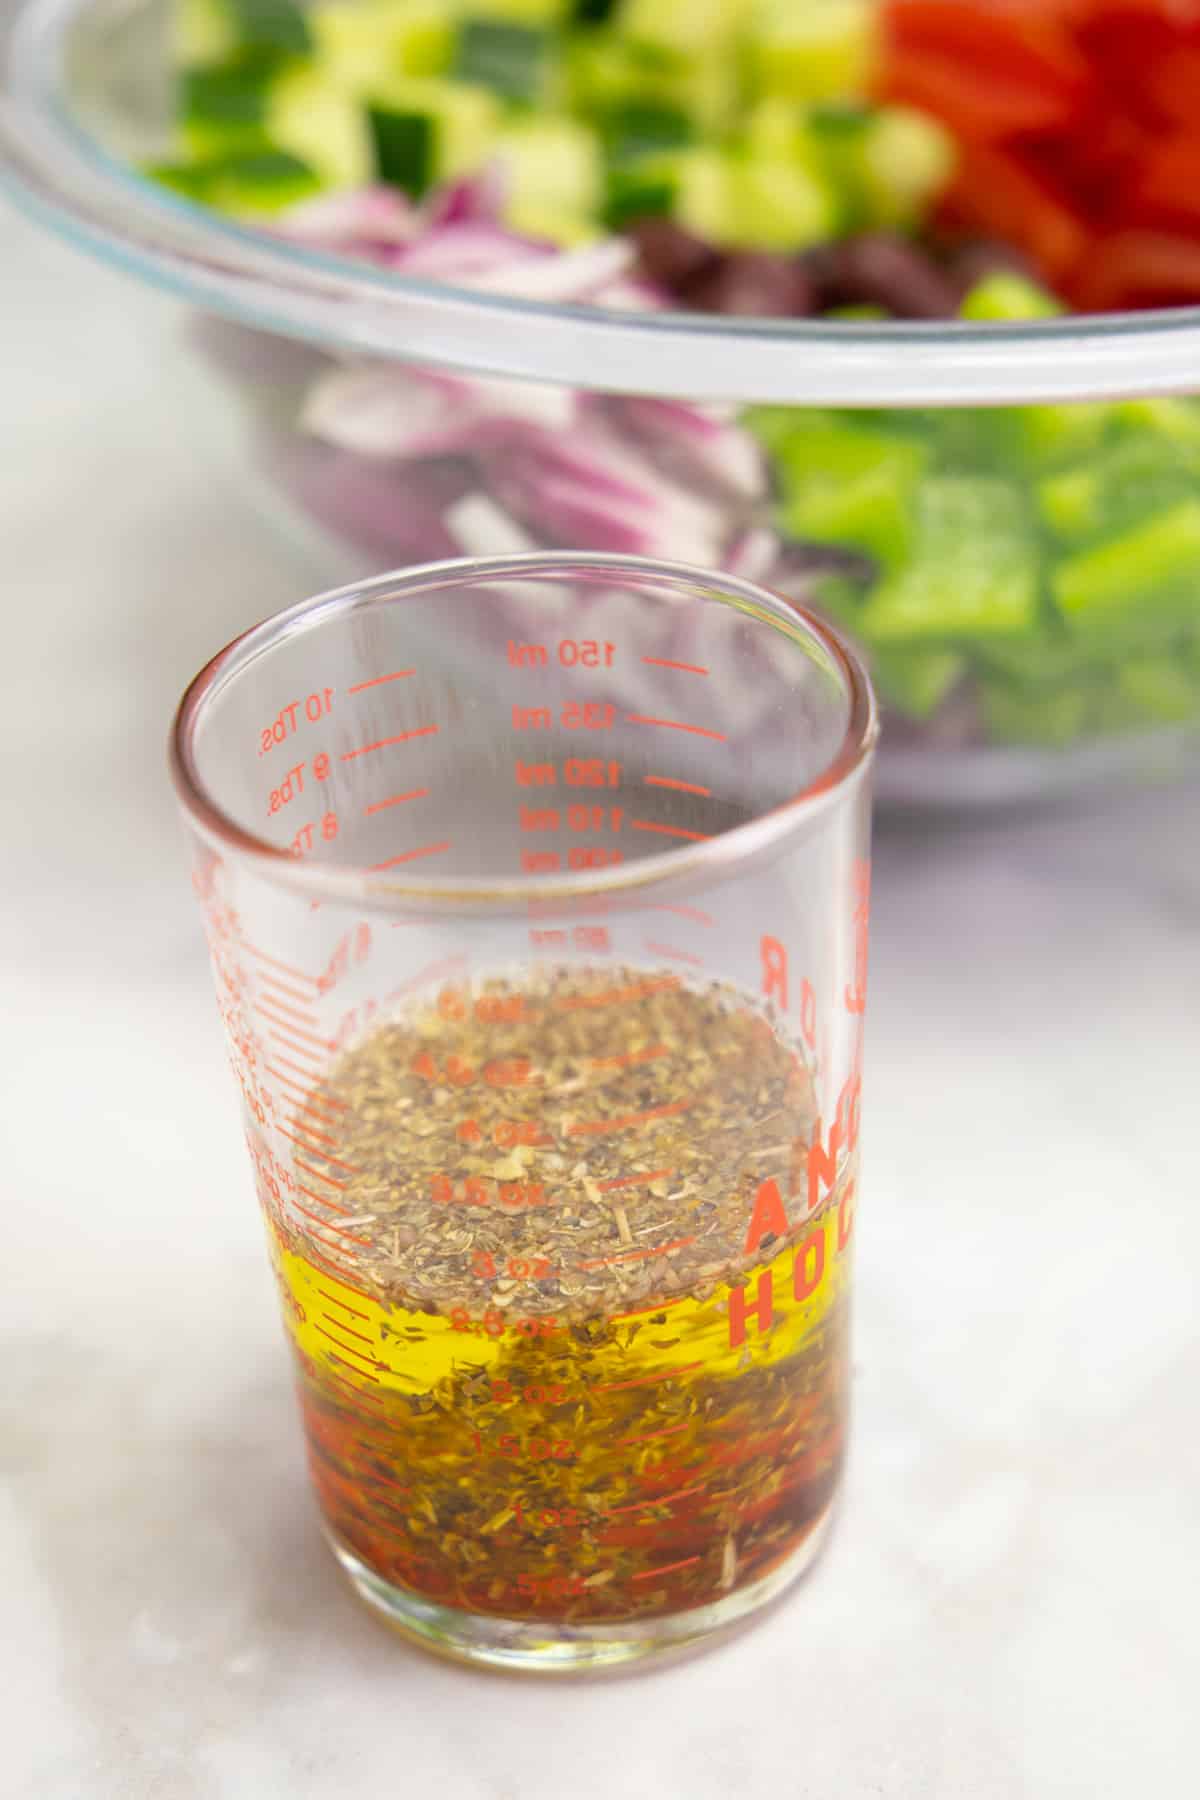 Greek salad dressing in a small cup.